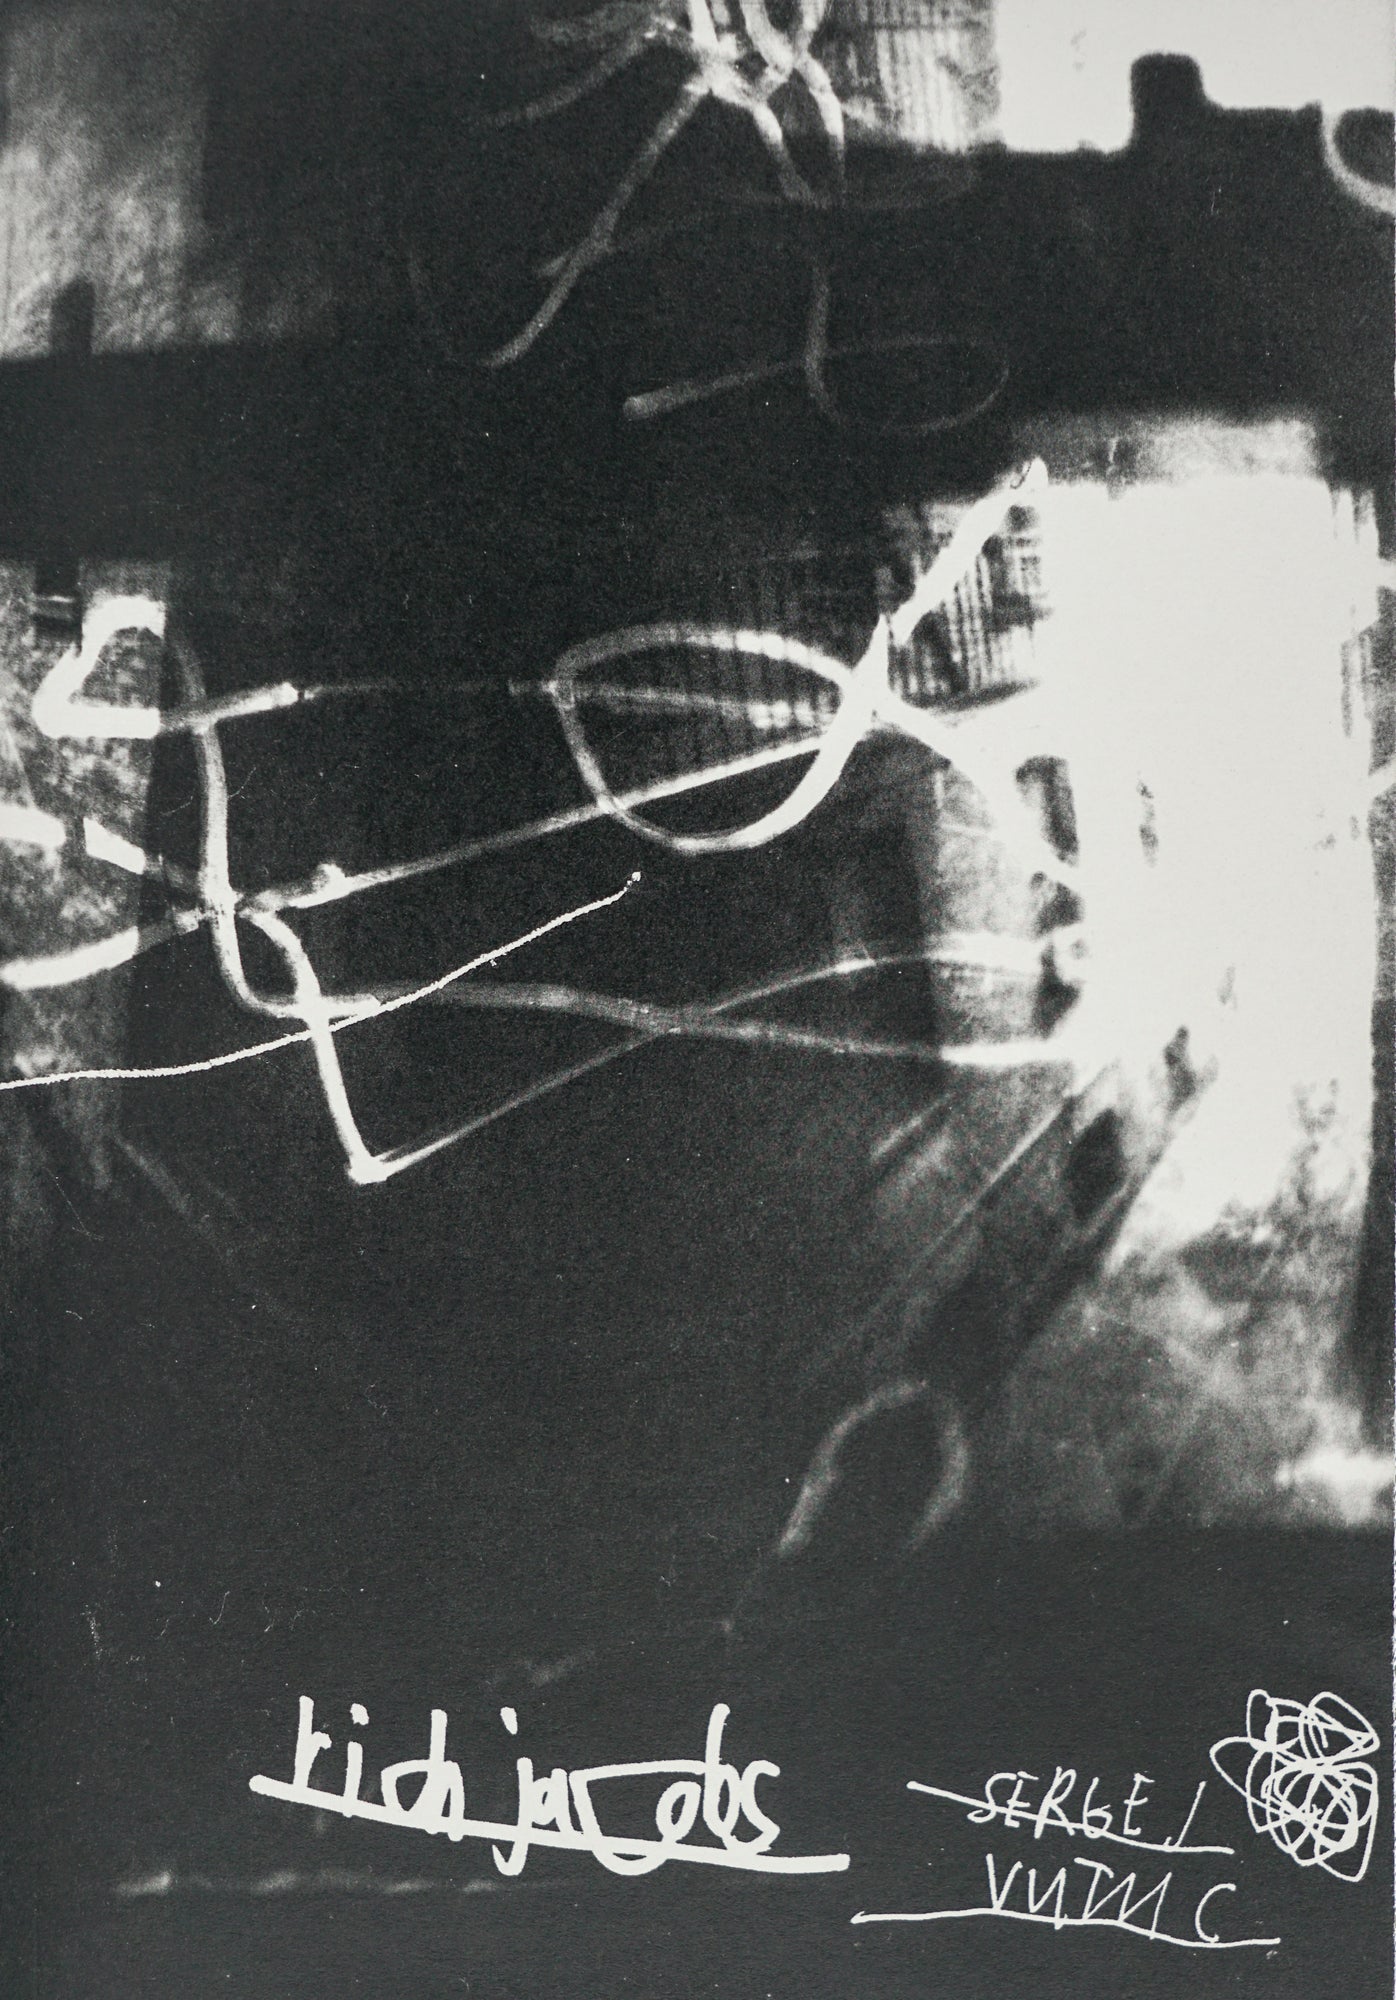 Book cover with an abstract field of black and white from a manipulated photograph. The authors names are at the bottom in handwriting: Sergej Vutuc and Rich Jacobs